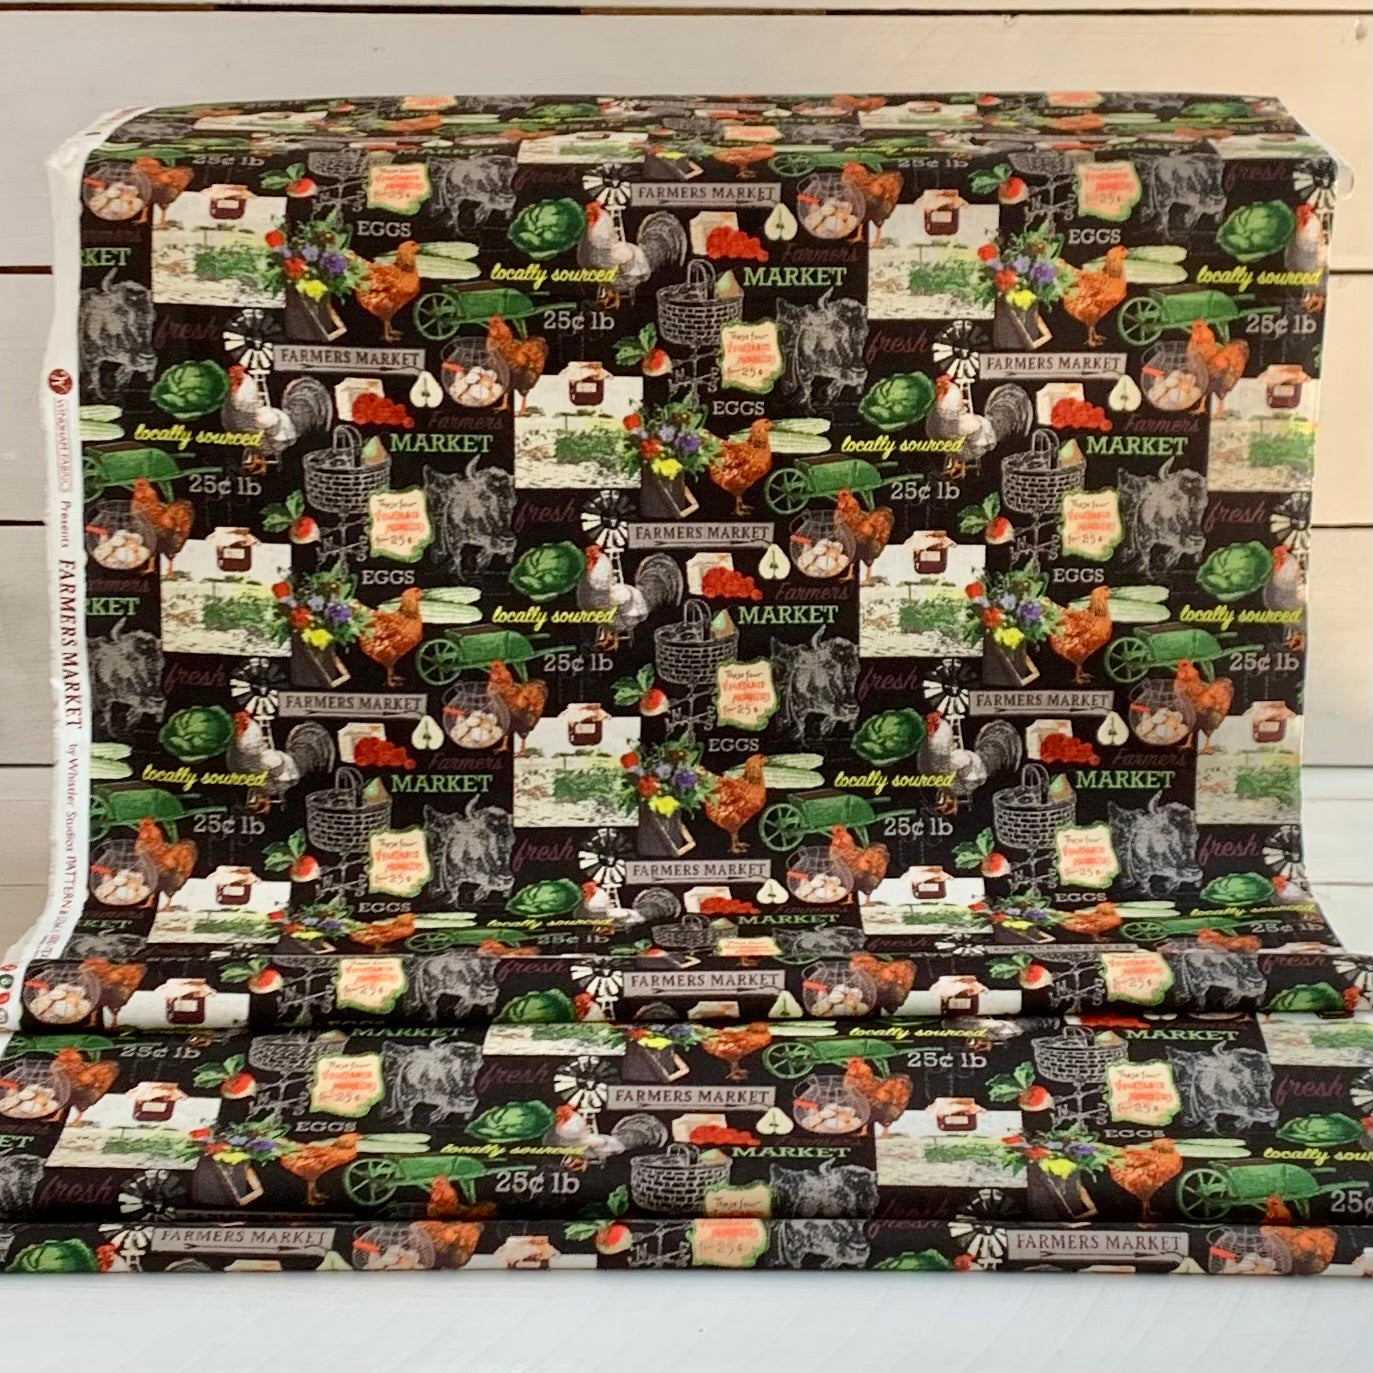 Farmers Market by Whistler Studios and Milled by Windham Fabrics- Black 52764-2 Cotton Fabric